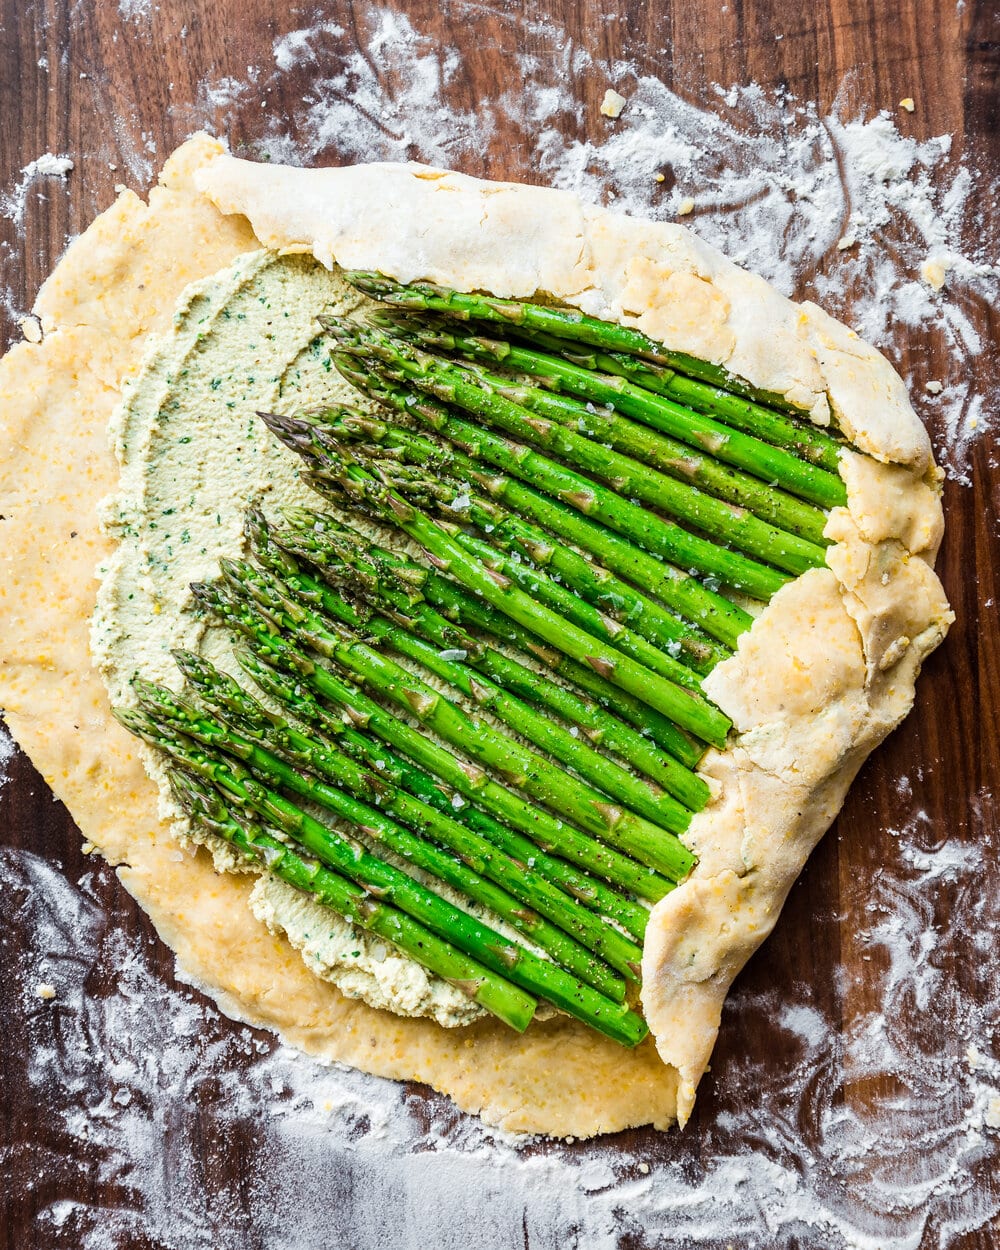 Dough completely covering two sides of the asparagus.